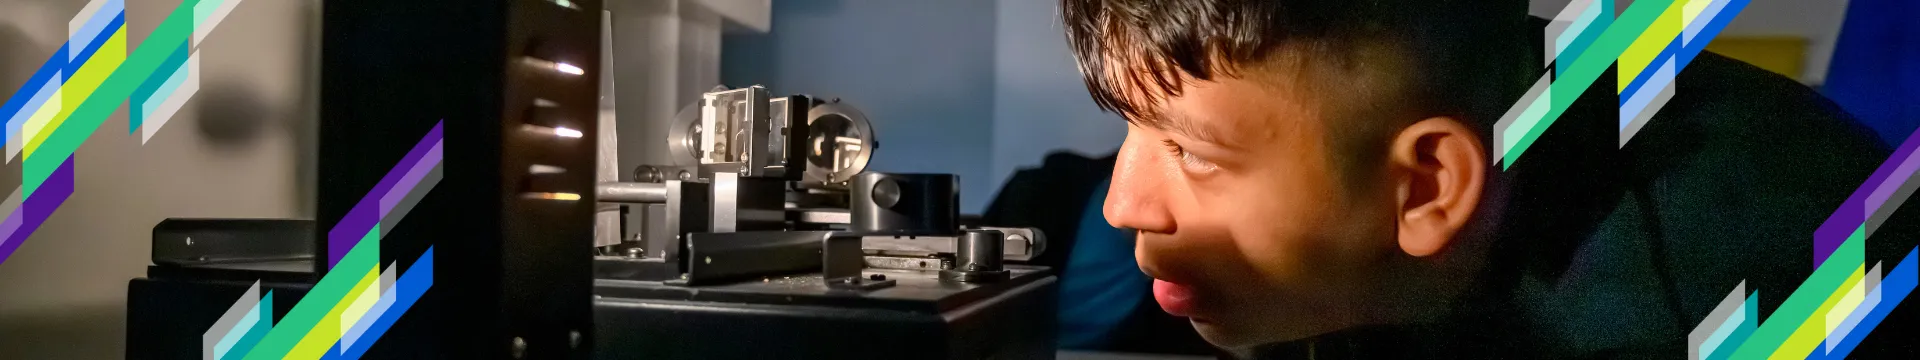 A boy looks at science experiment in the dark, with light from it shining on his face